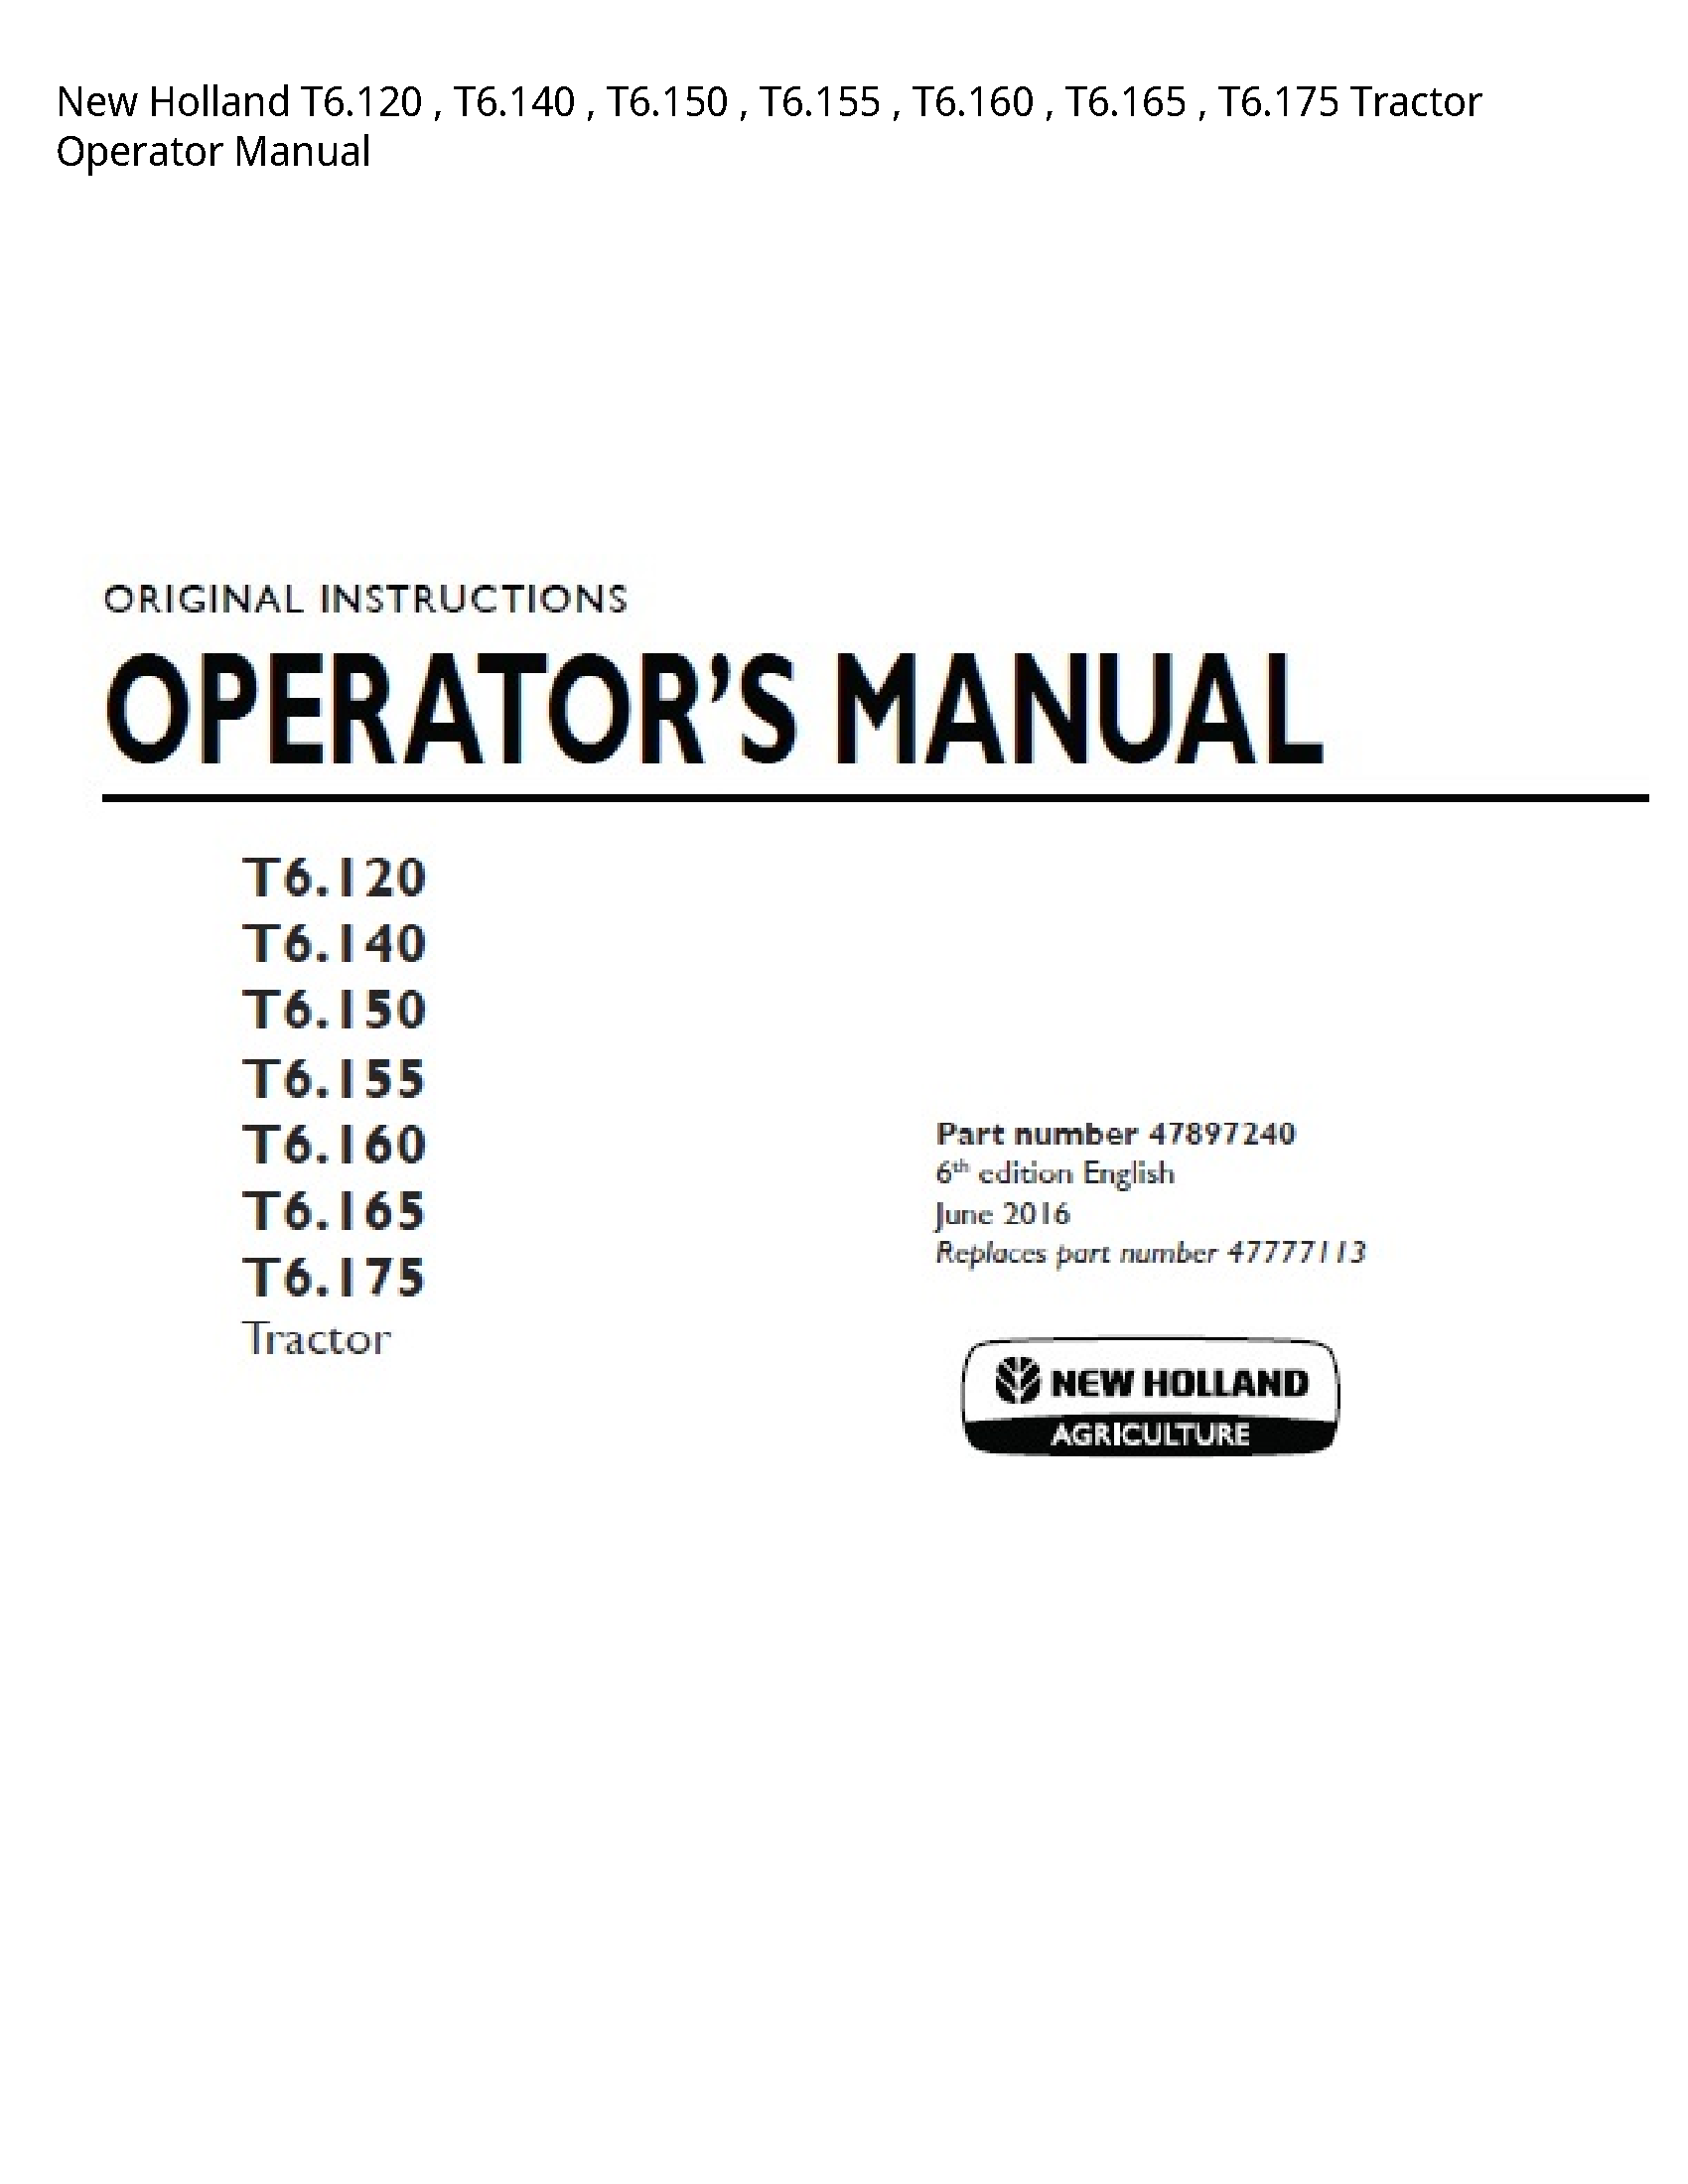 New Holland T6.120 Tractor Operator manual